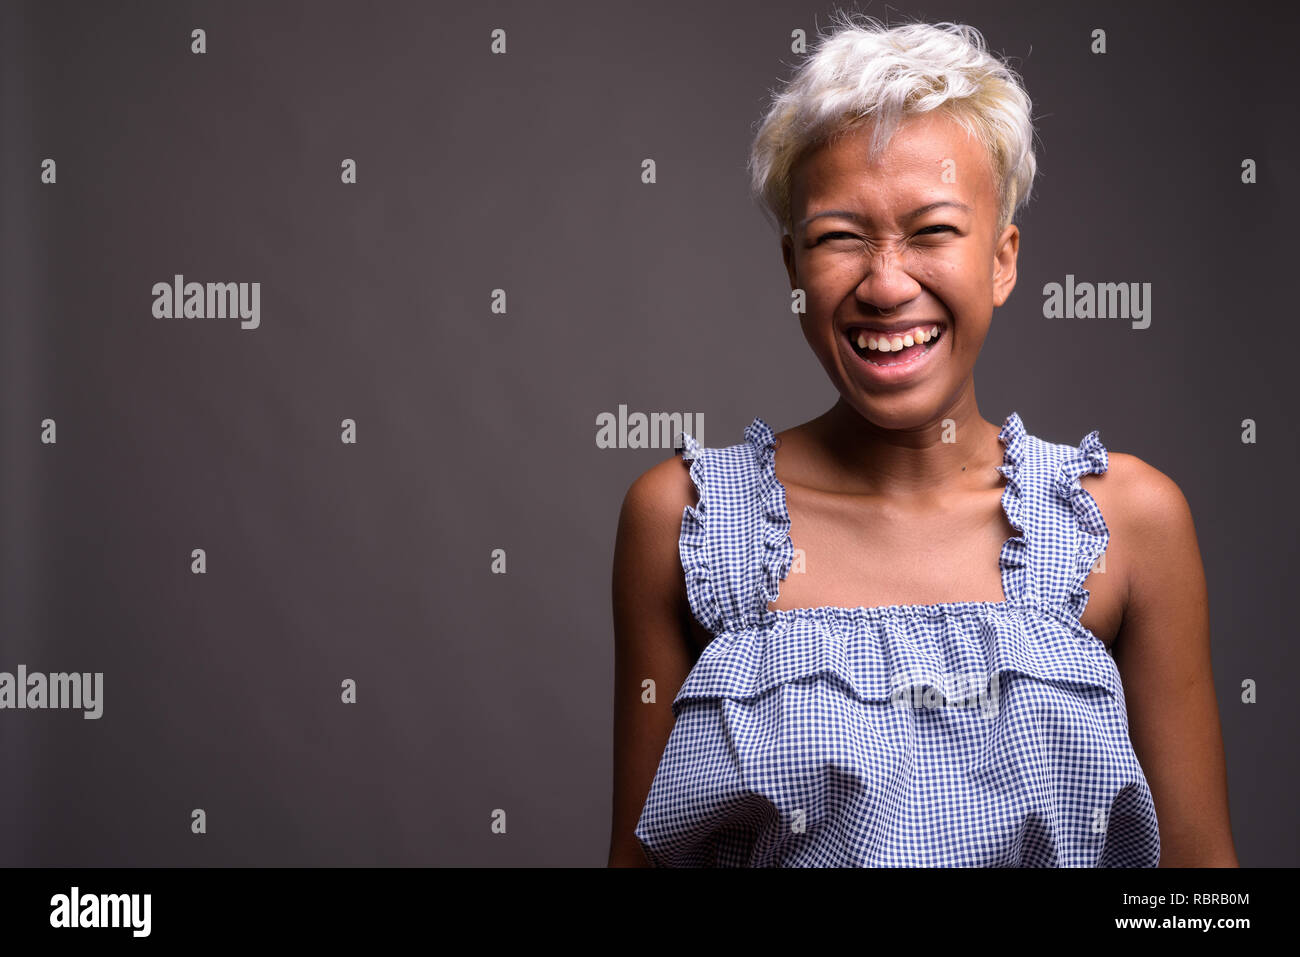 Young beautiful rebellious woman with short hair laughing Stock Photo